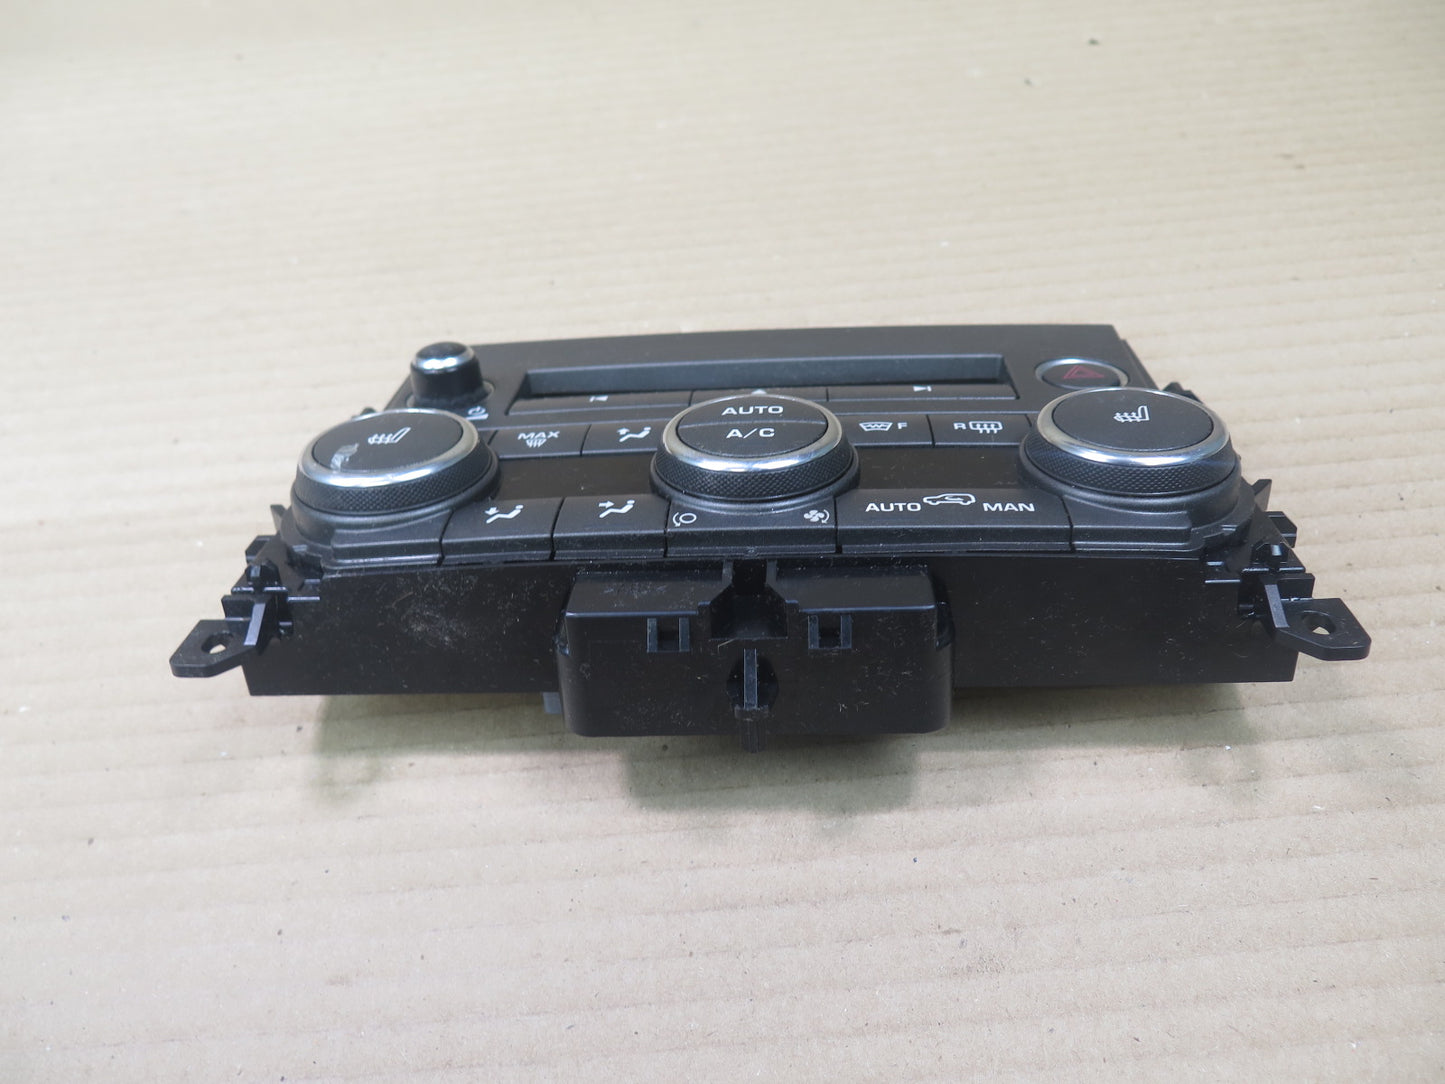 14-15 RANGE ROVER EVOQUE L538 A/C HEATER CLIMATE CONTROL SWITCH PANEL OEM